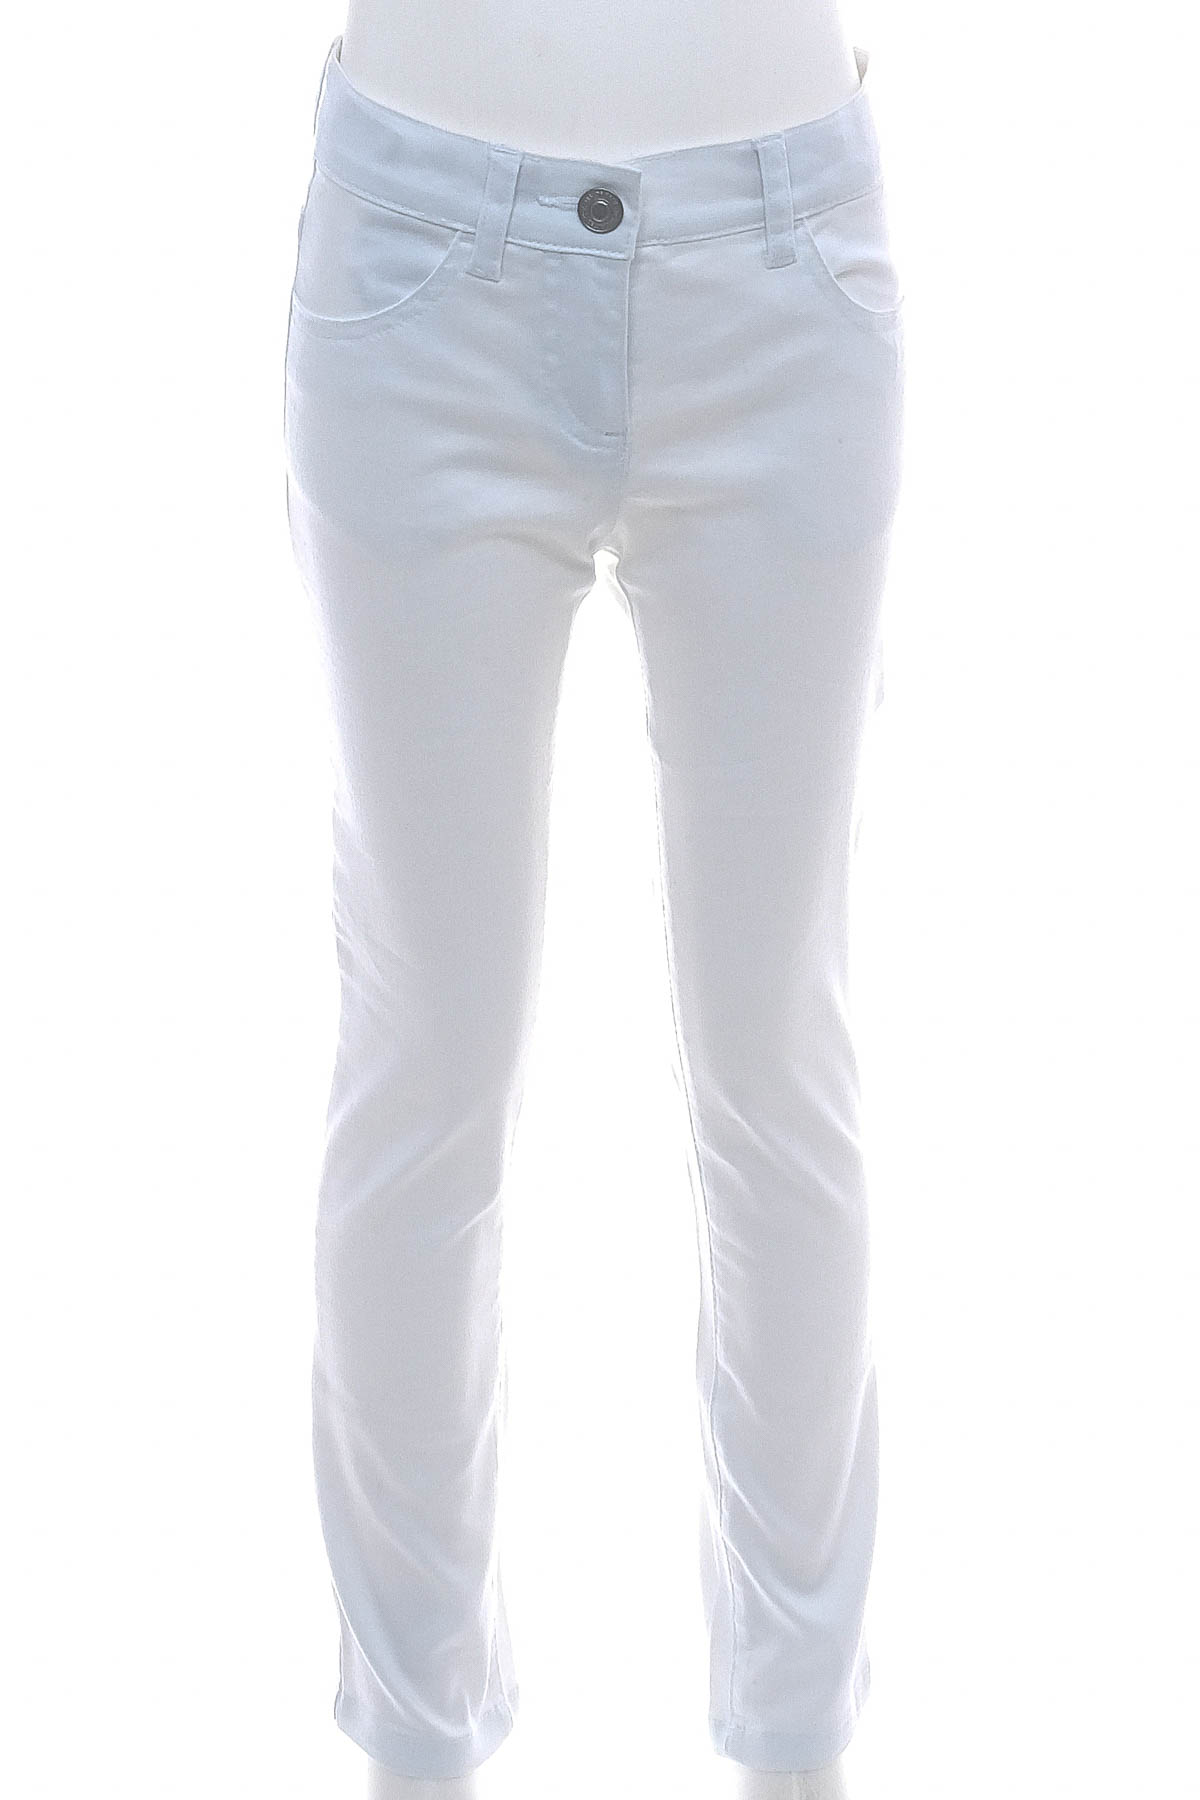 Trousers for girl - United Colors of Benetton - 0